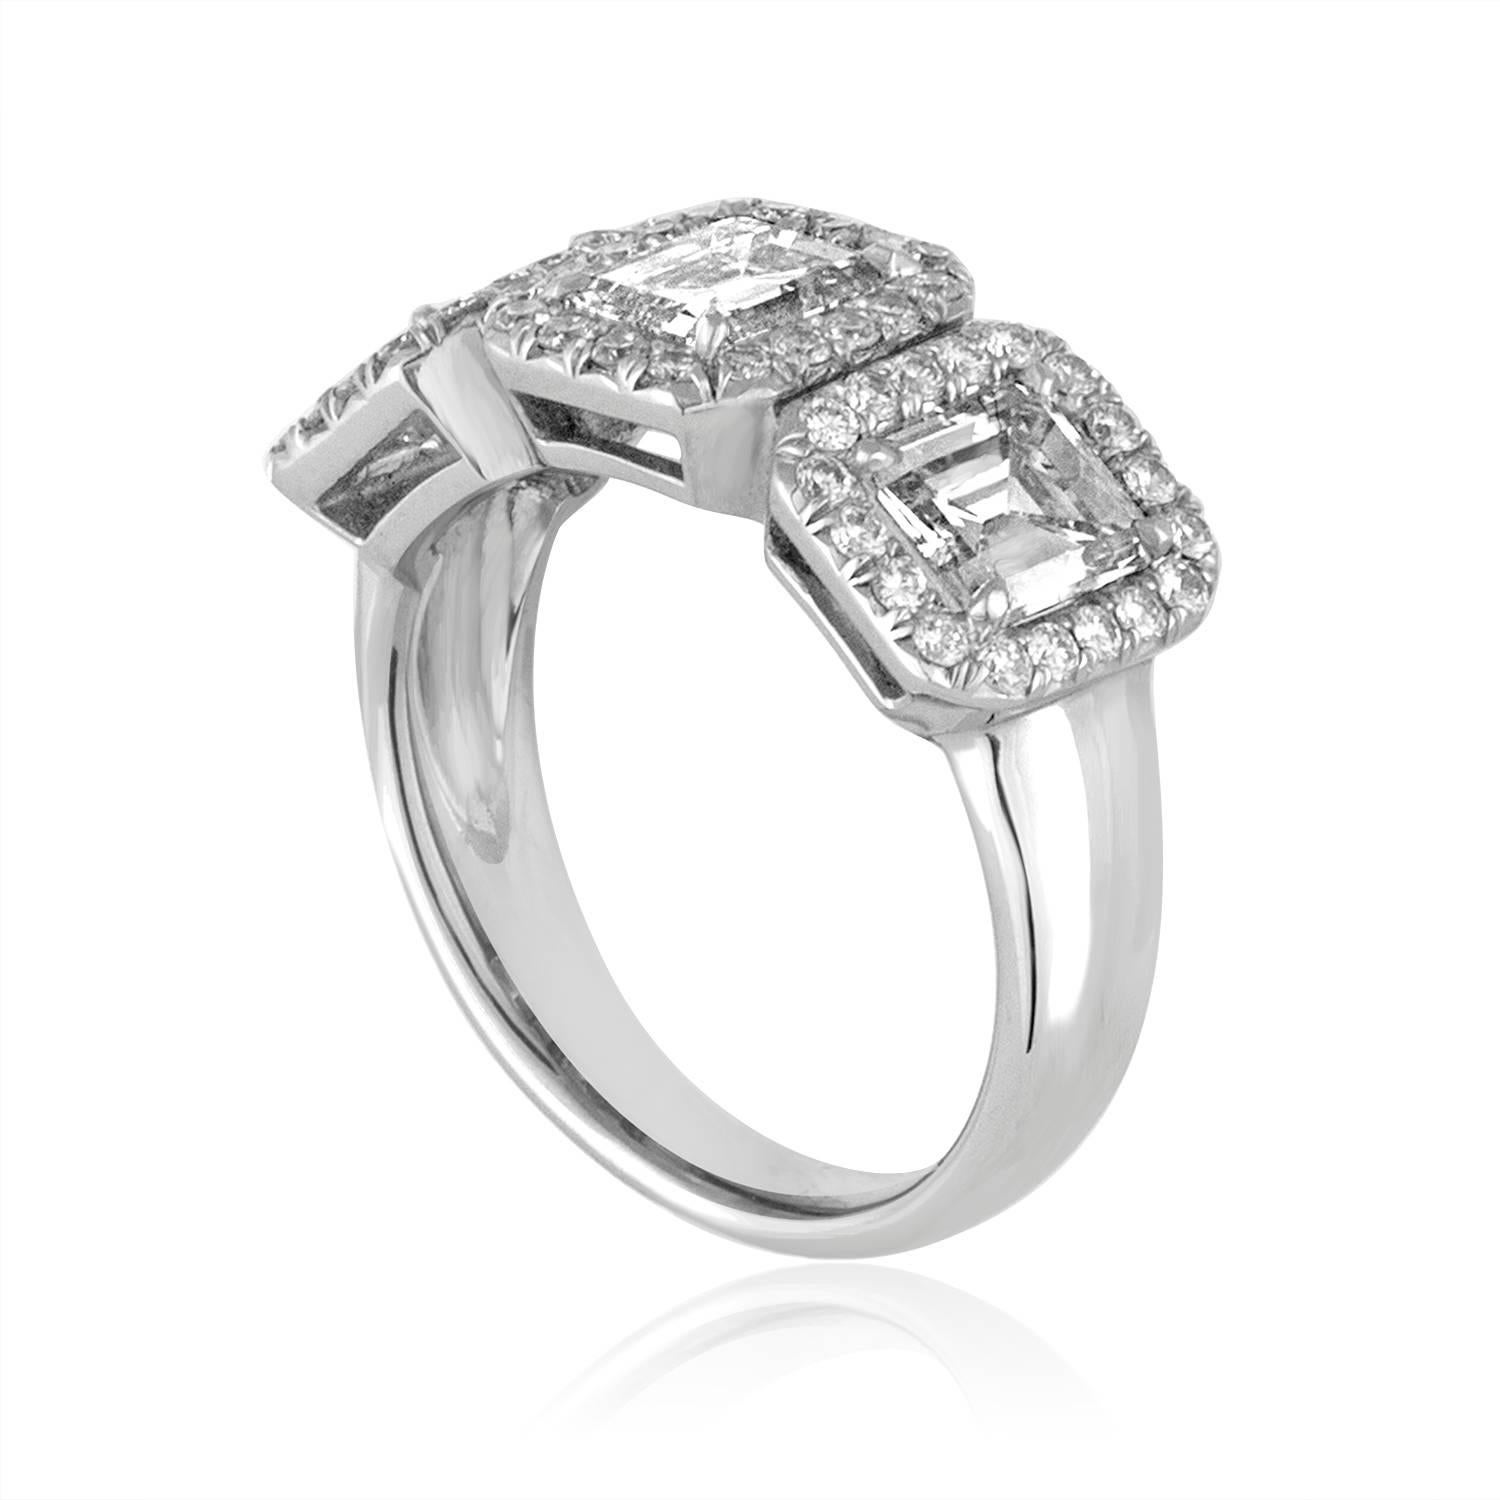 3 Stone Emerald Cut Diamonds Set in 18K White Gold Ring
The 3 Emerald Cut Diamonds 2.30Ct I VS
The 3 stones are surrounded small Diamonds.
There are 0.50Ct Small Diamonds G VS.
The ring is a size 6, sizable.
The ring weighs 7.2 grams